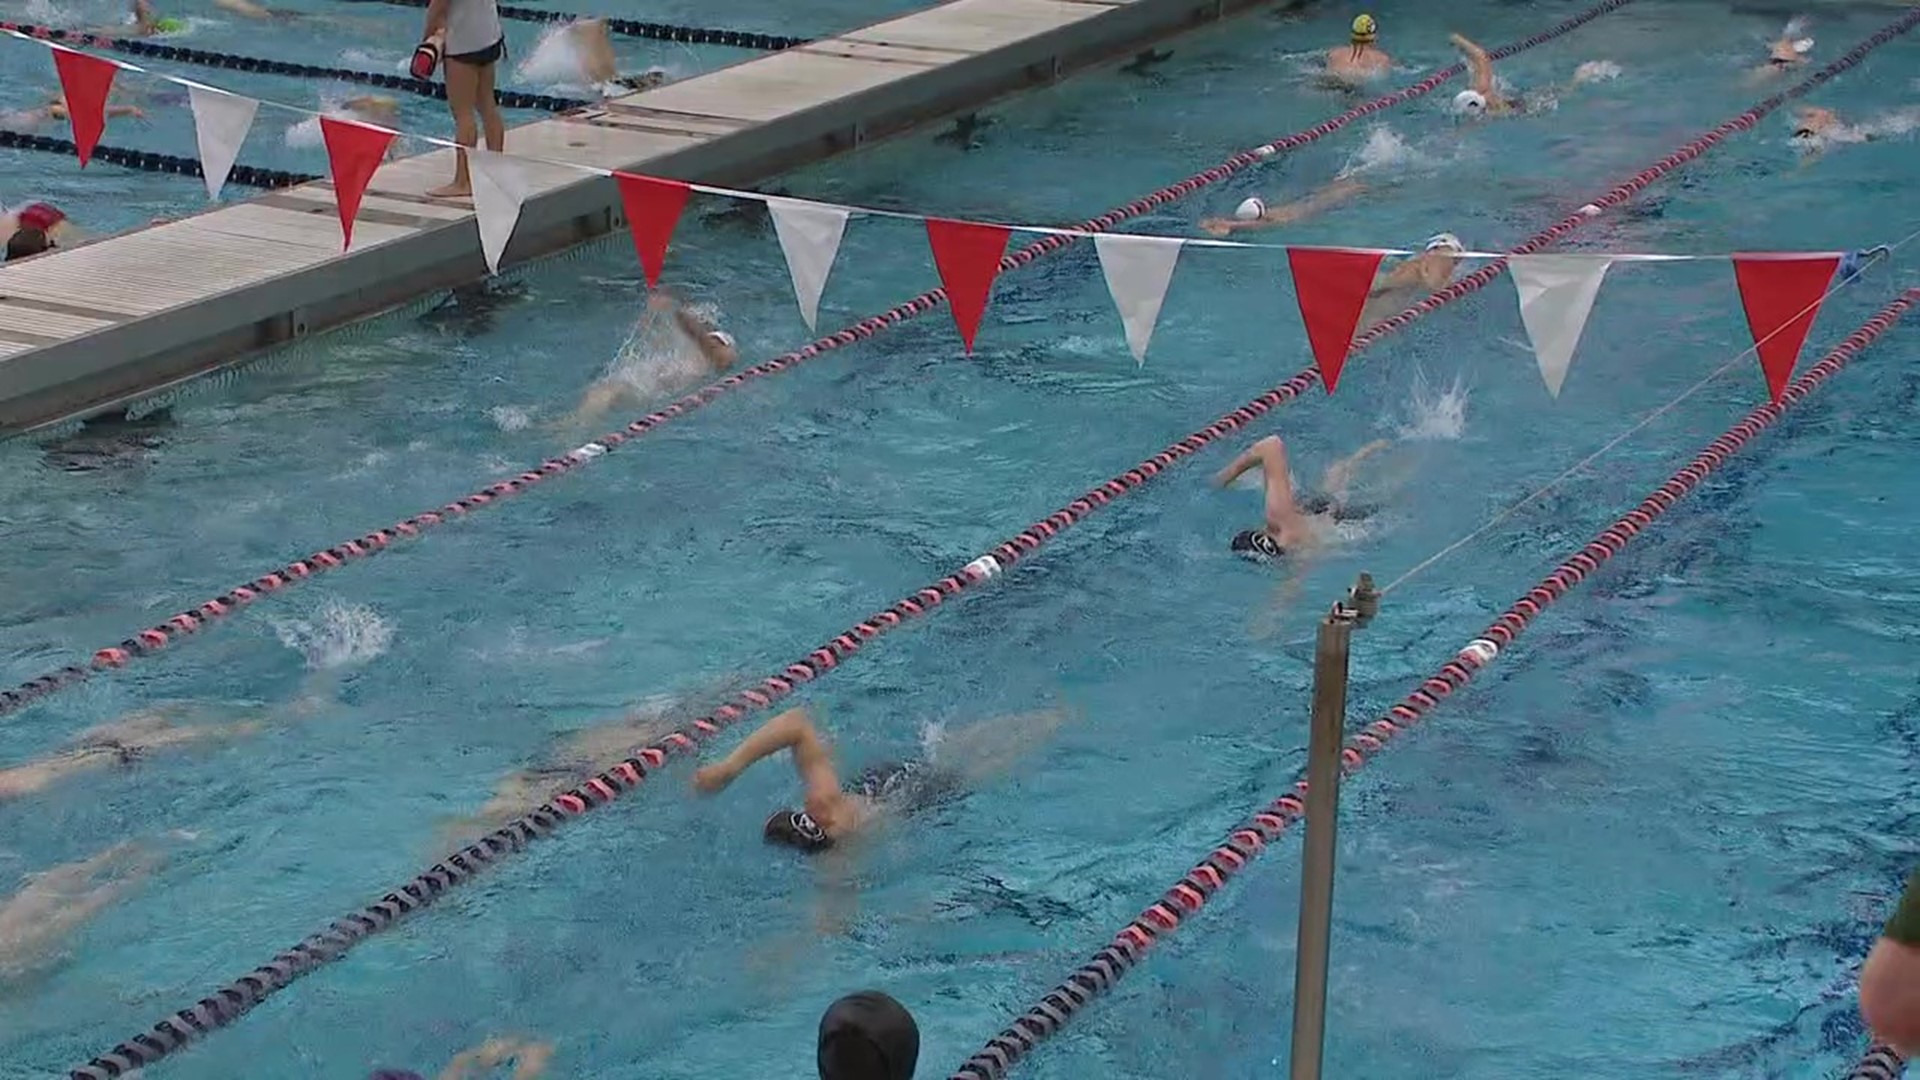 This week, Union County's population will grow by several thousand people. The PIAA swimming and diving championships are being held at Bucknell University.